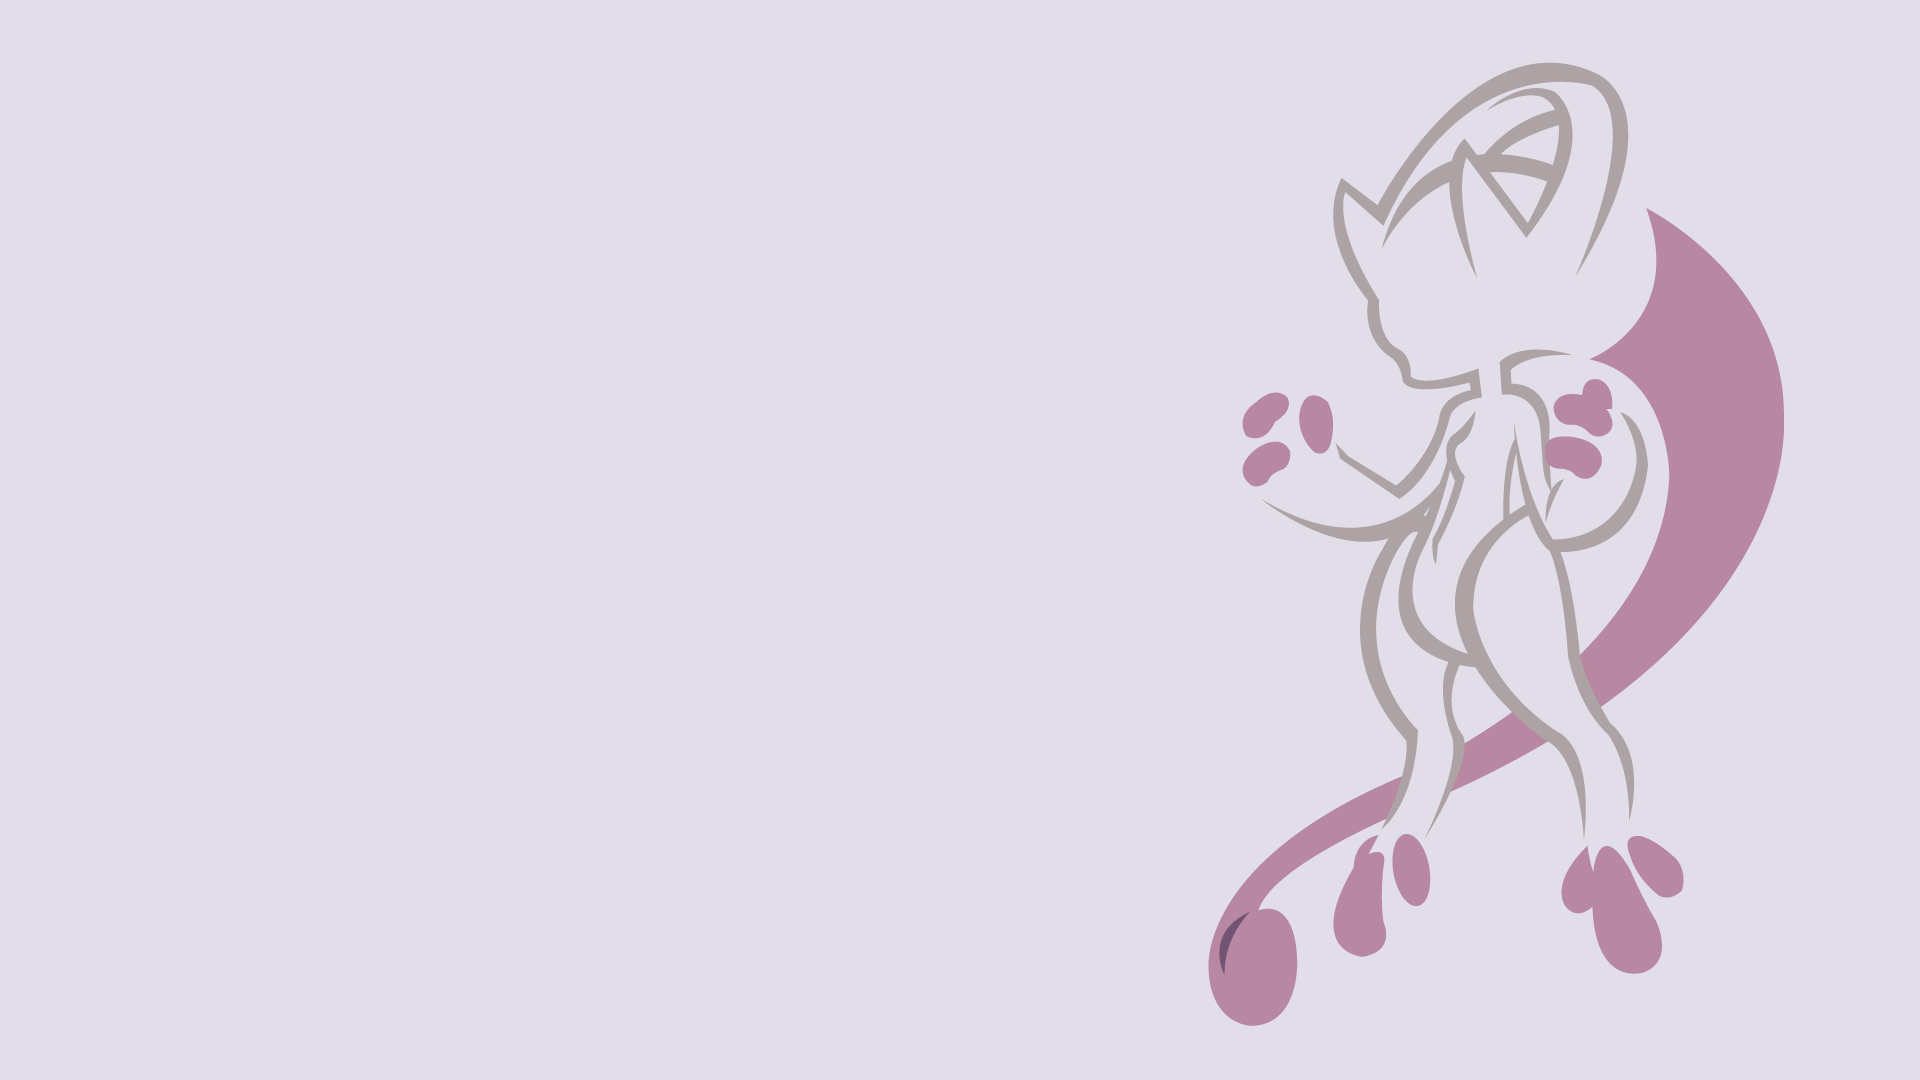 Mewtwo Wallpapers - Wallpaper Cave